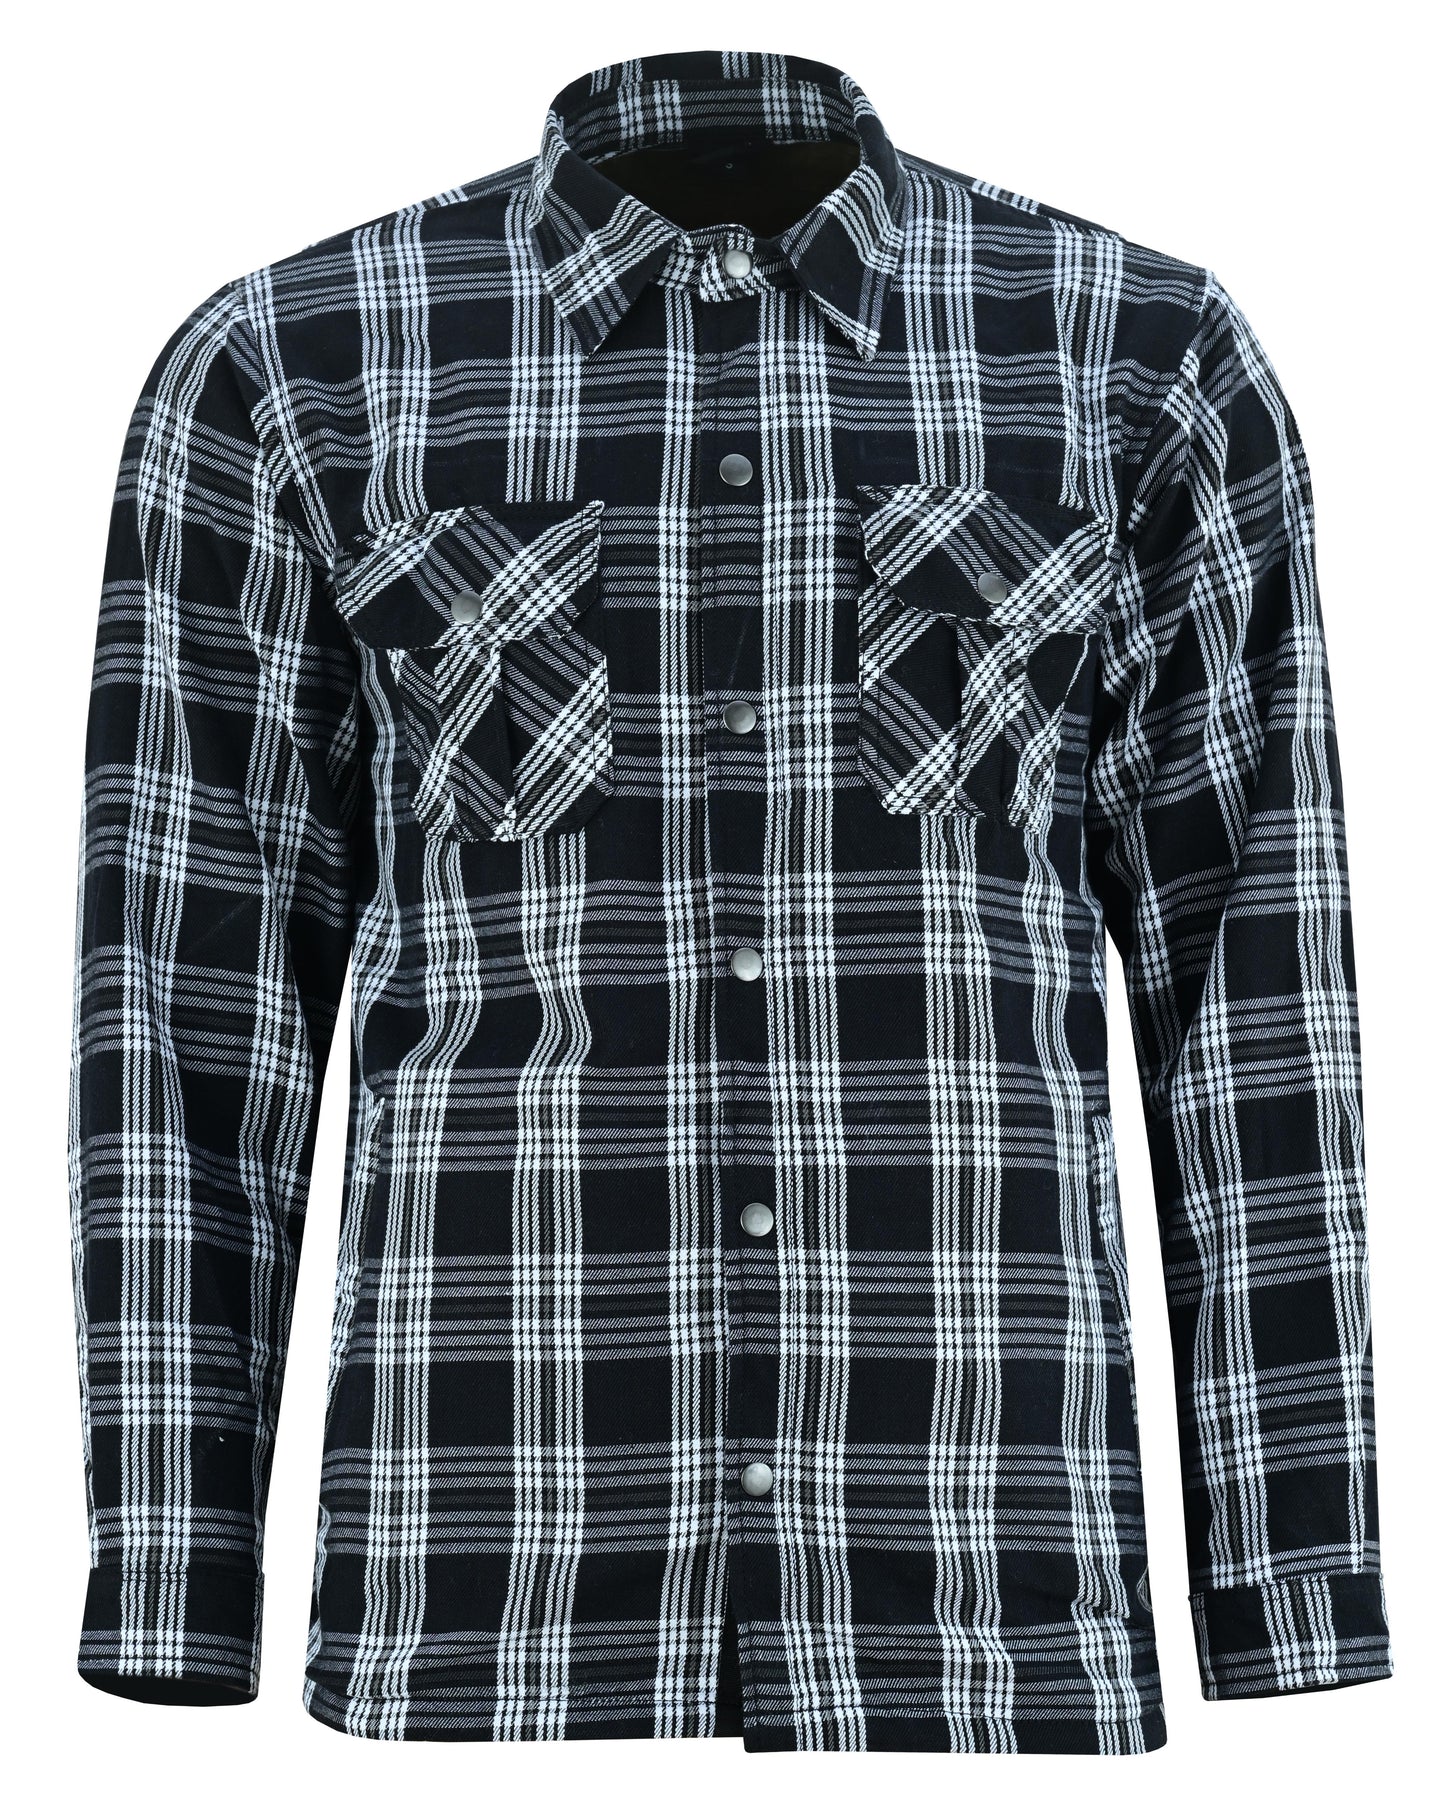 Checkered Champ Men’s Black and White Armored Flannel Shirt